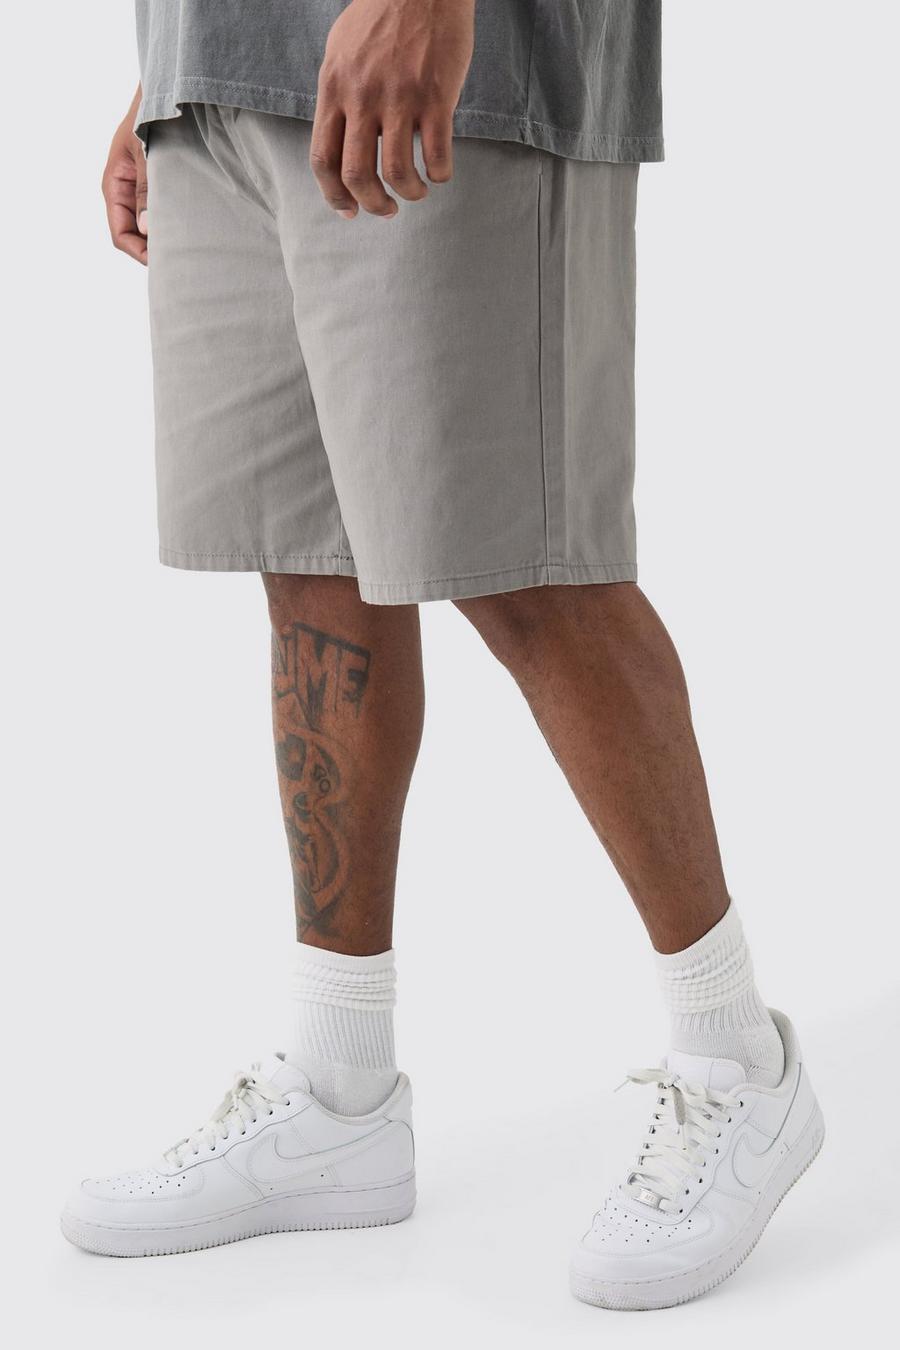 Plus Elastic Waist Grey Relaxed Fit Shorts